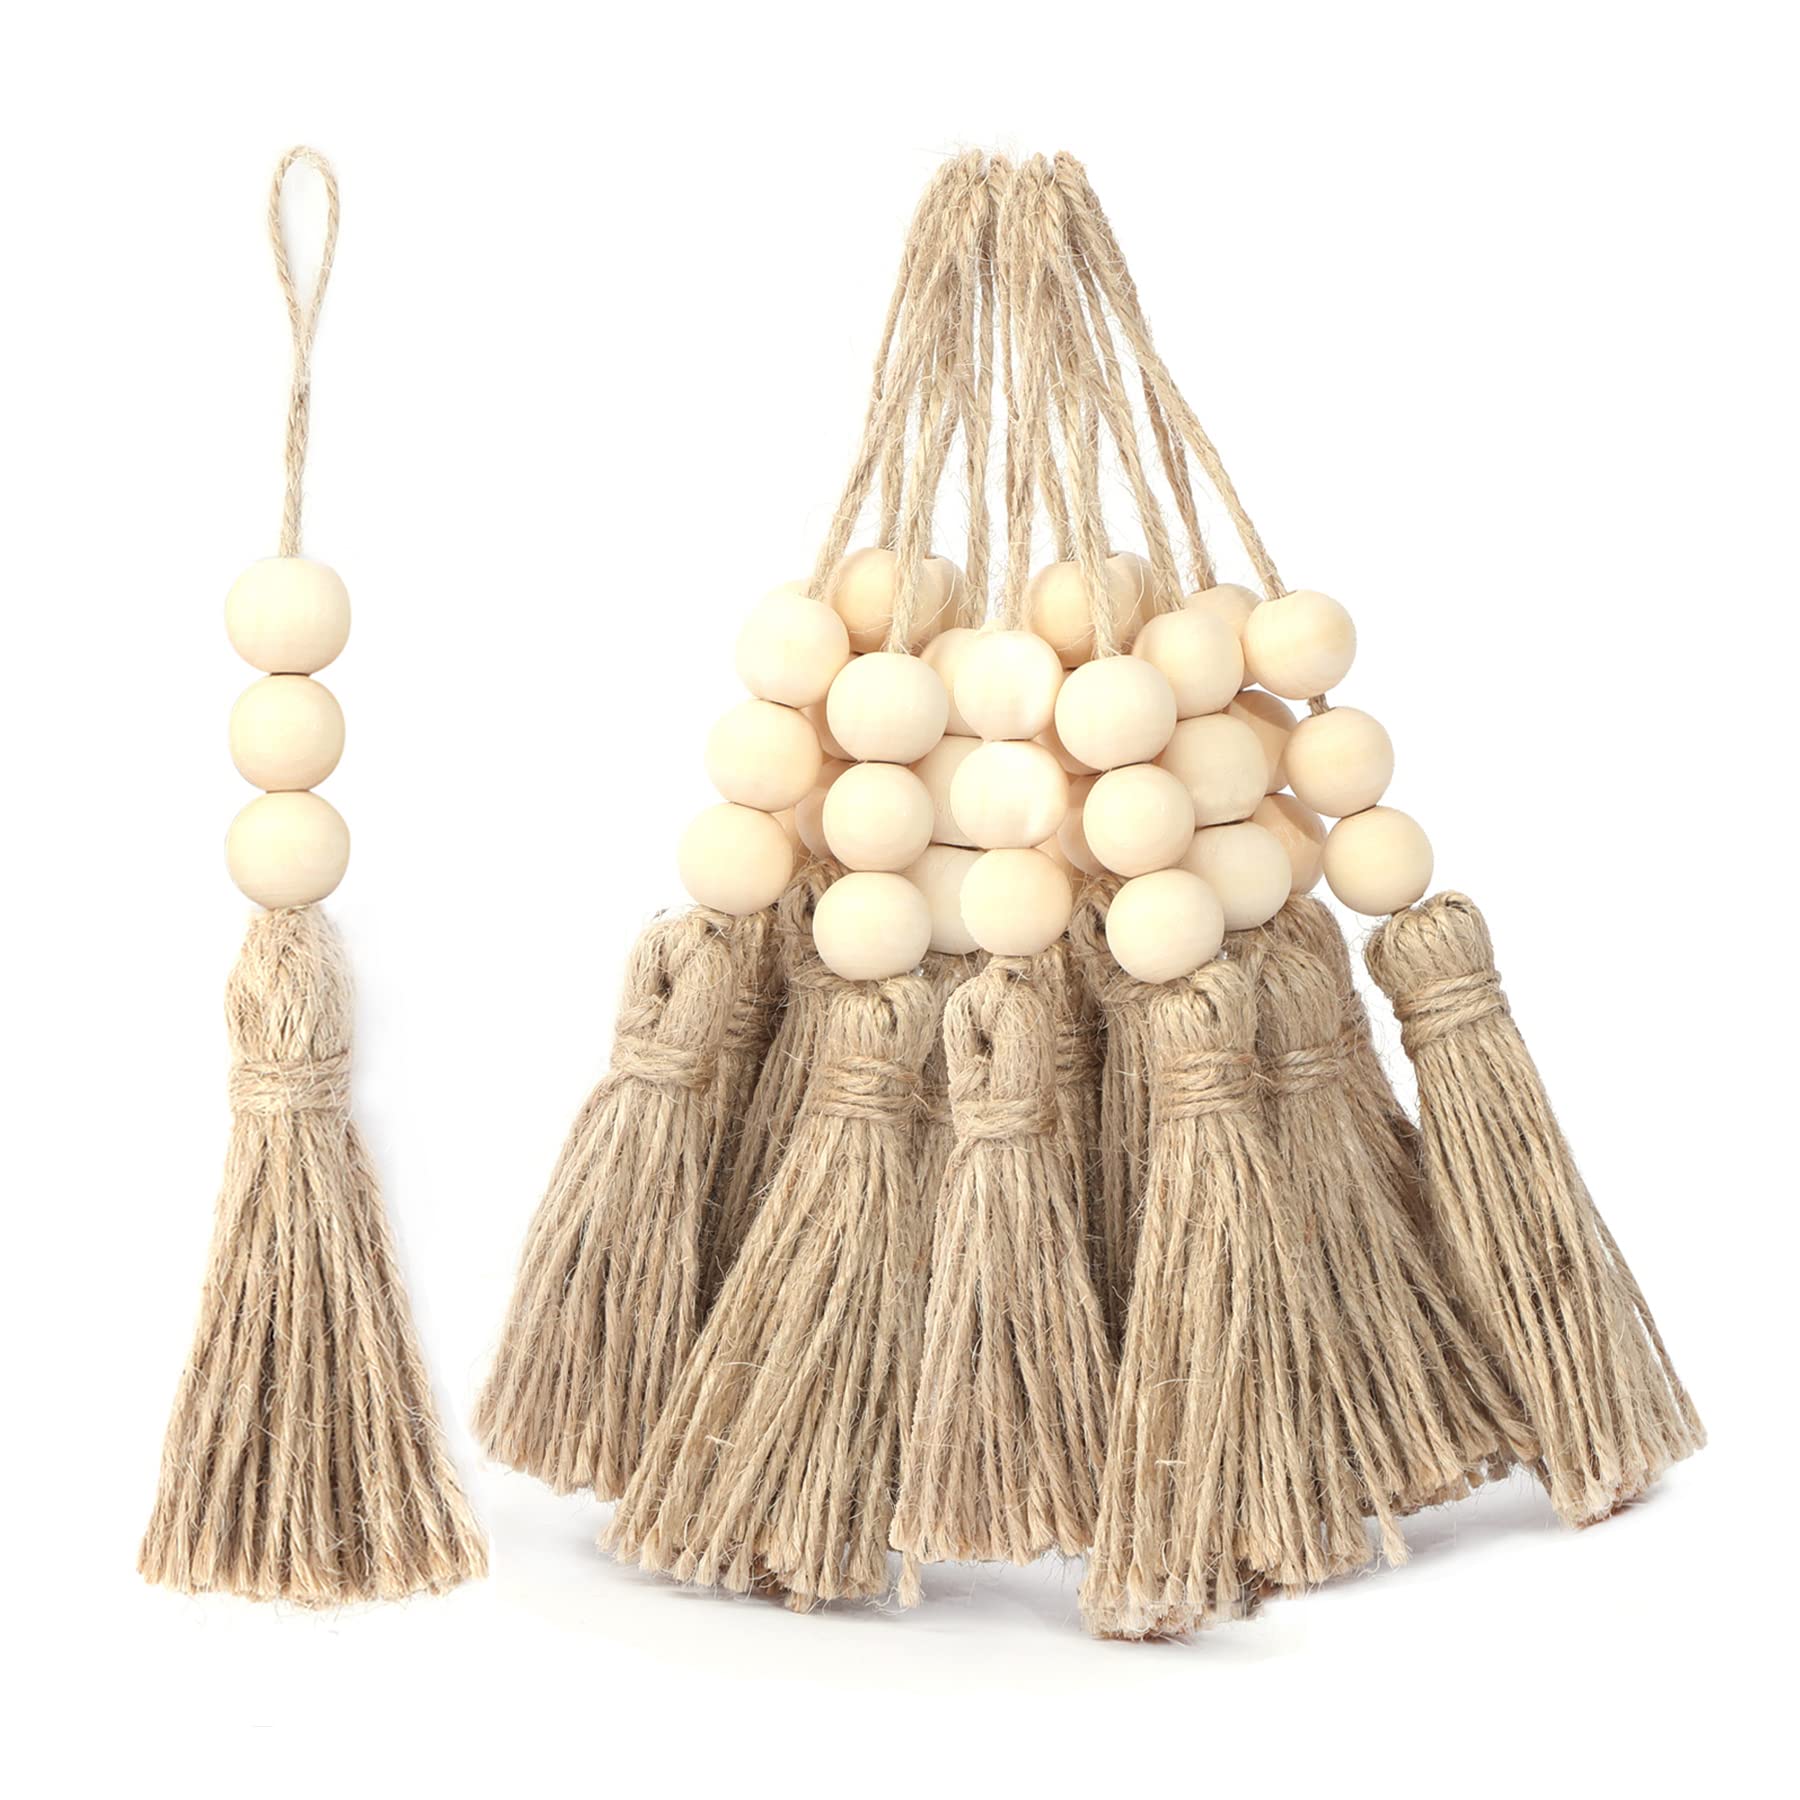 AEKAO 20 Pack Jute Rope Tassel with 3 Wood Beads, Hemp Rope Burlap Tassels  for Christmas Tree DIY Craft Wood Beads Garland Project Wedding Home Party  Decorations (Natural Color)